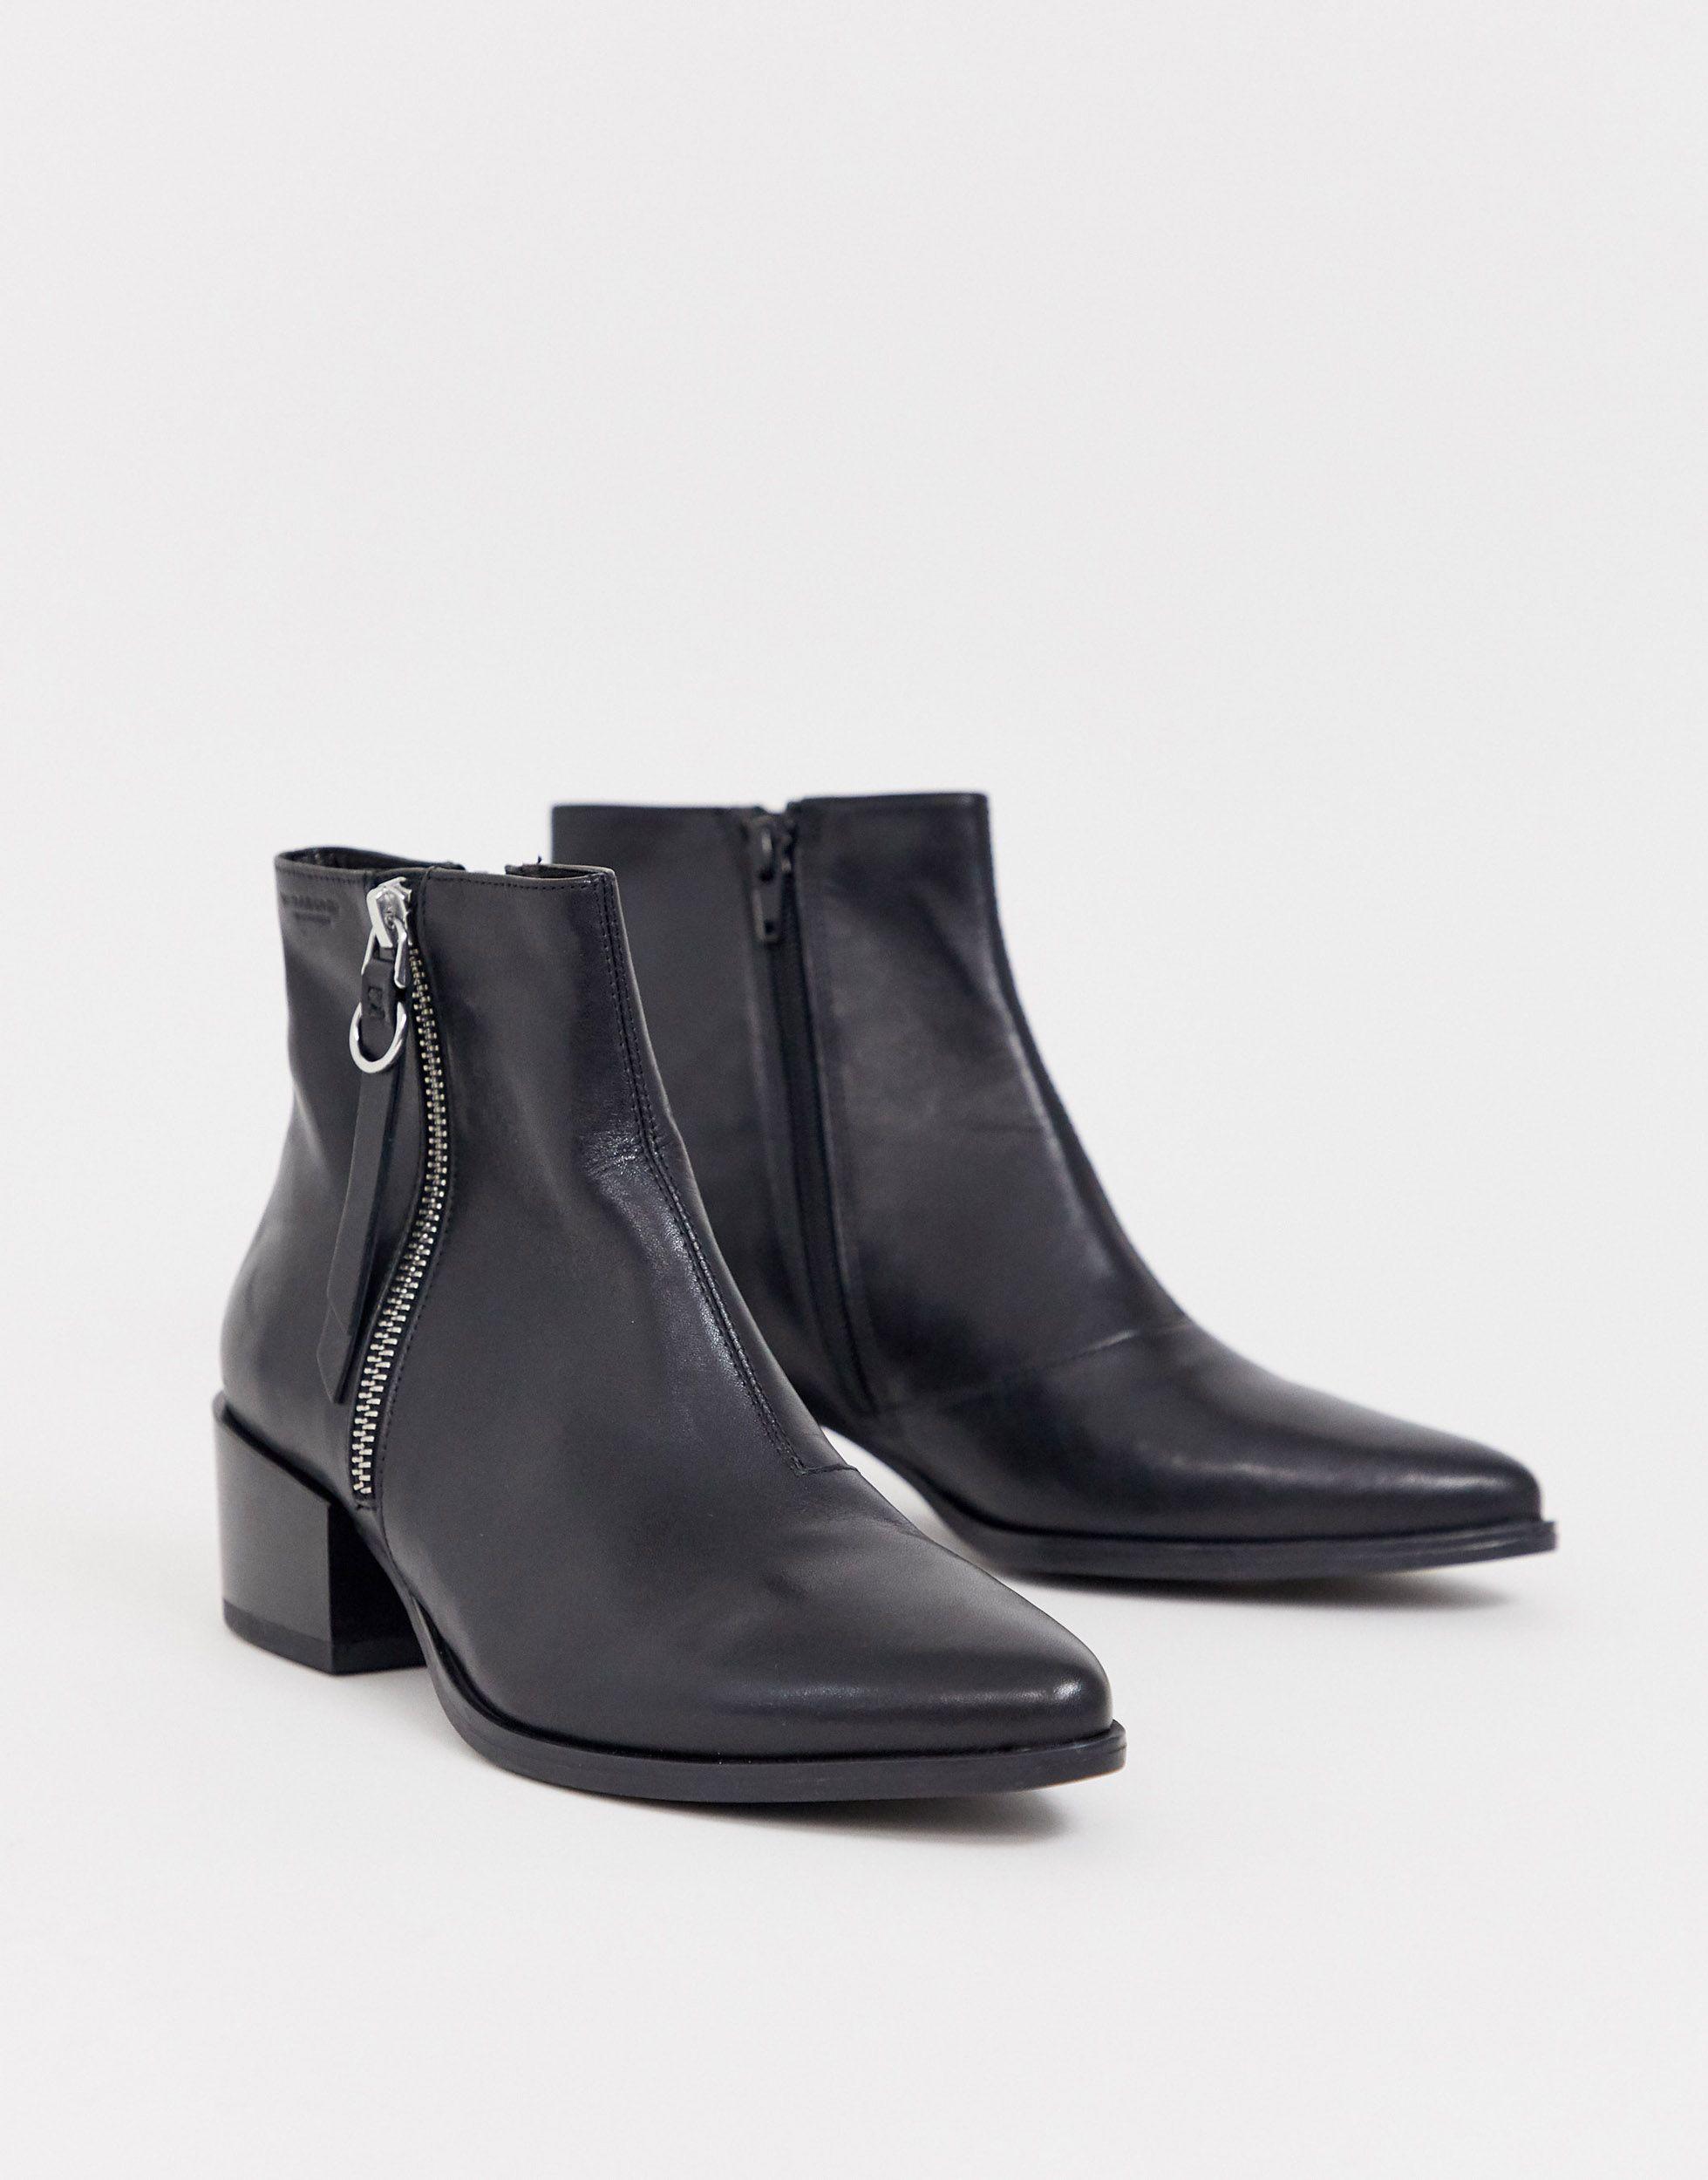 Vagabond Shoemakers Marja Leather Heeled Ankle Boots in Black | Lyst